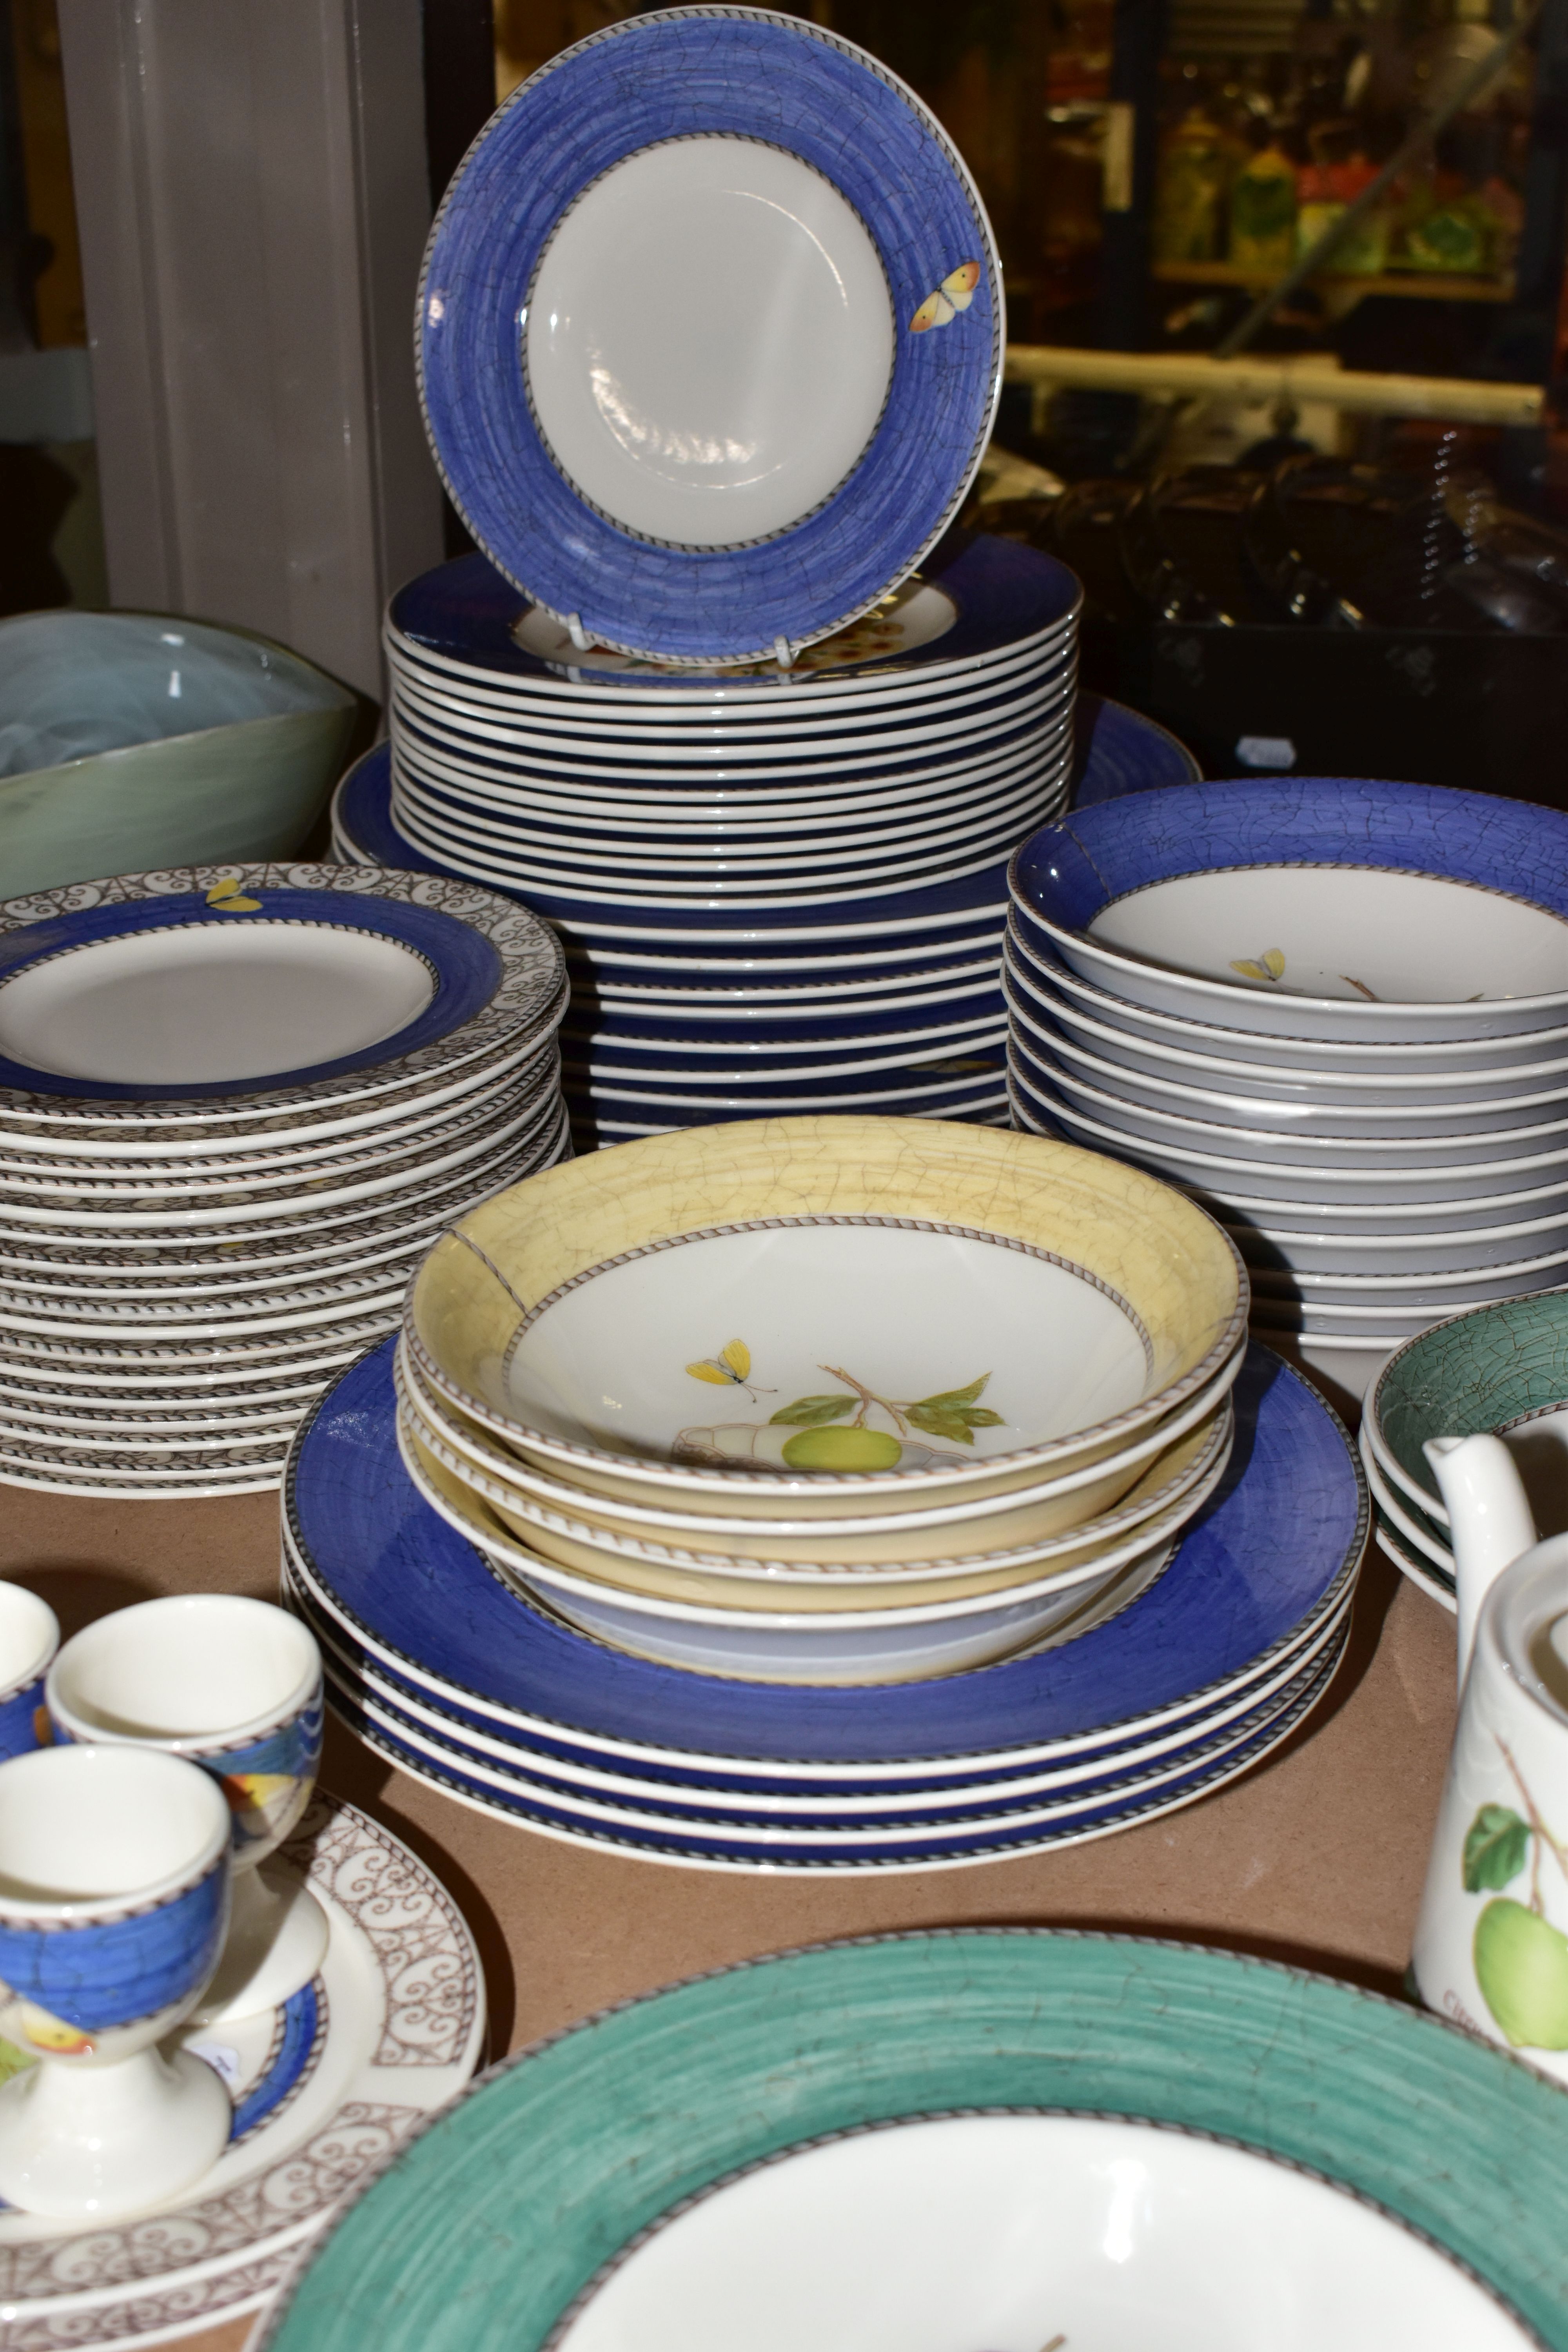 A ONE HUNDRED AND SEVEN PIECE WEDGWOOD SARAH'S GARDEN DINNER SERVICE, with blue border unless - Image 6 of 9